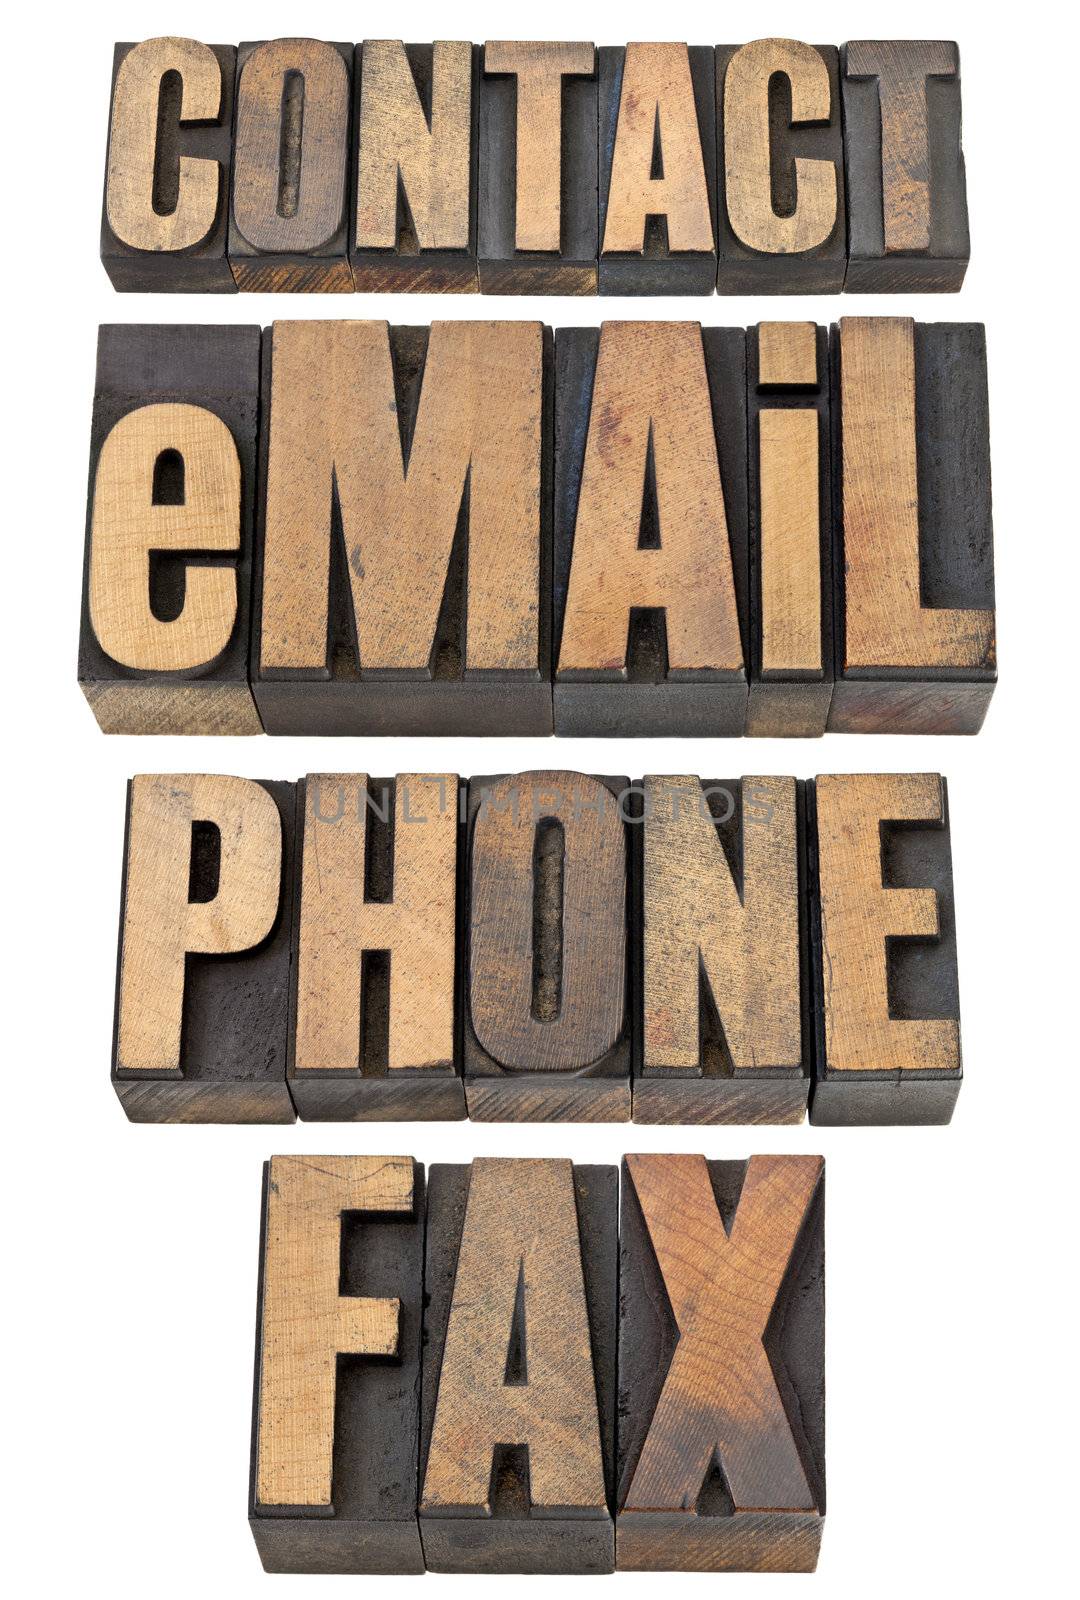 contact, email, phone, fax word set by PixelsAway